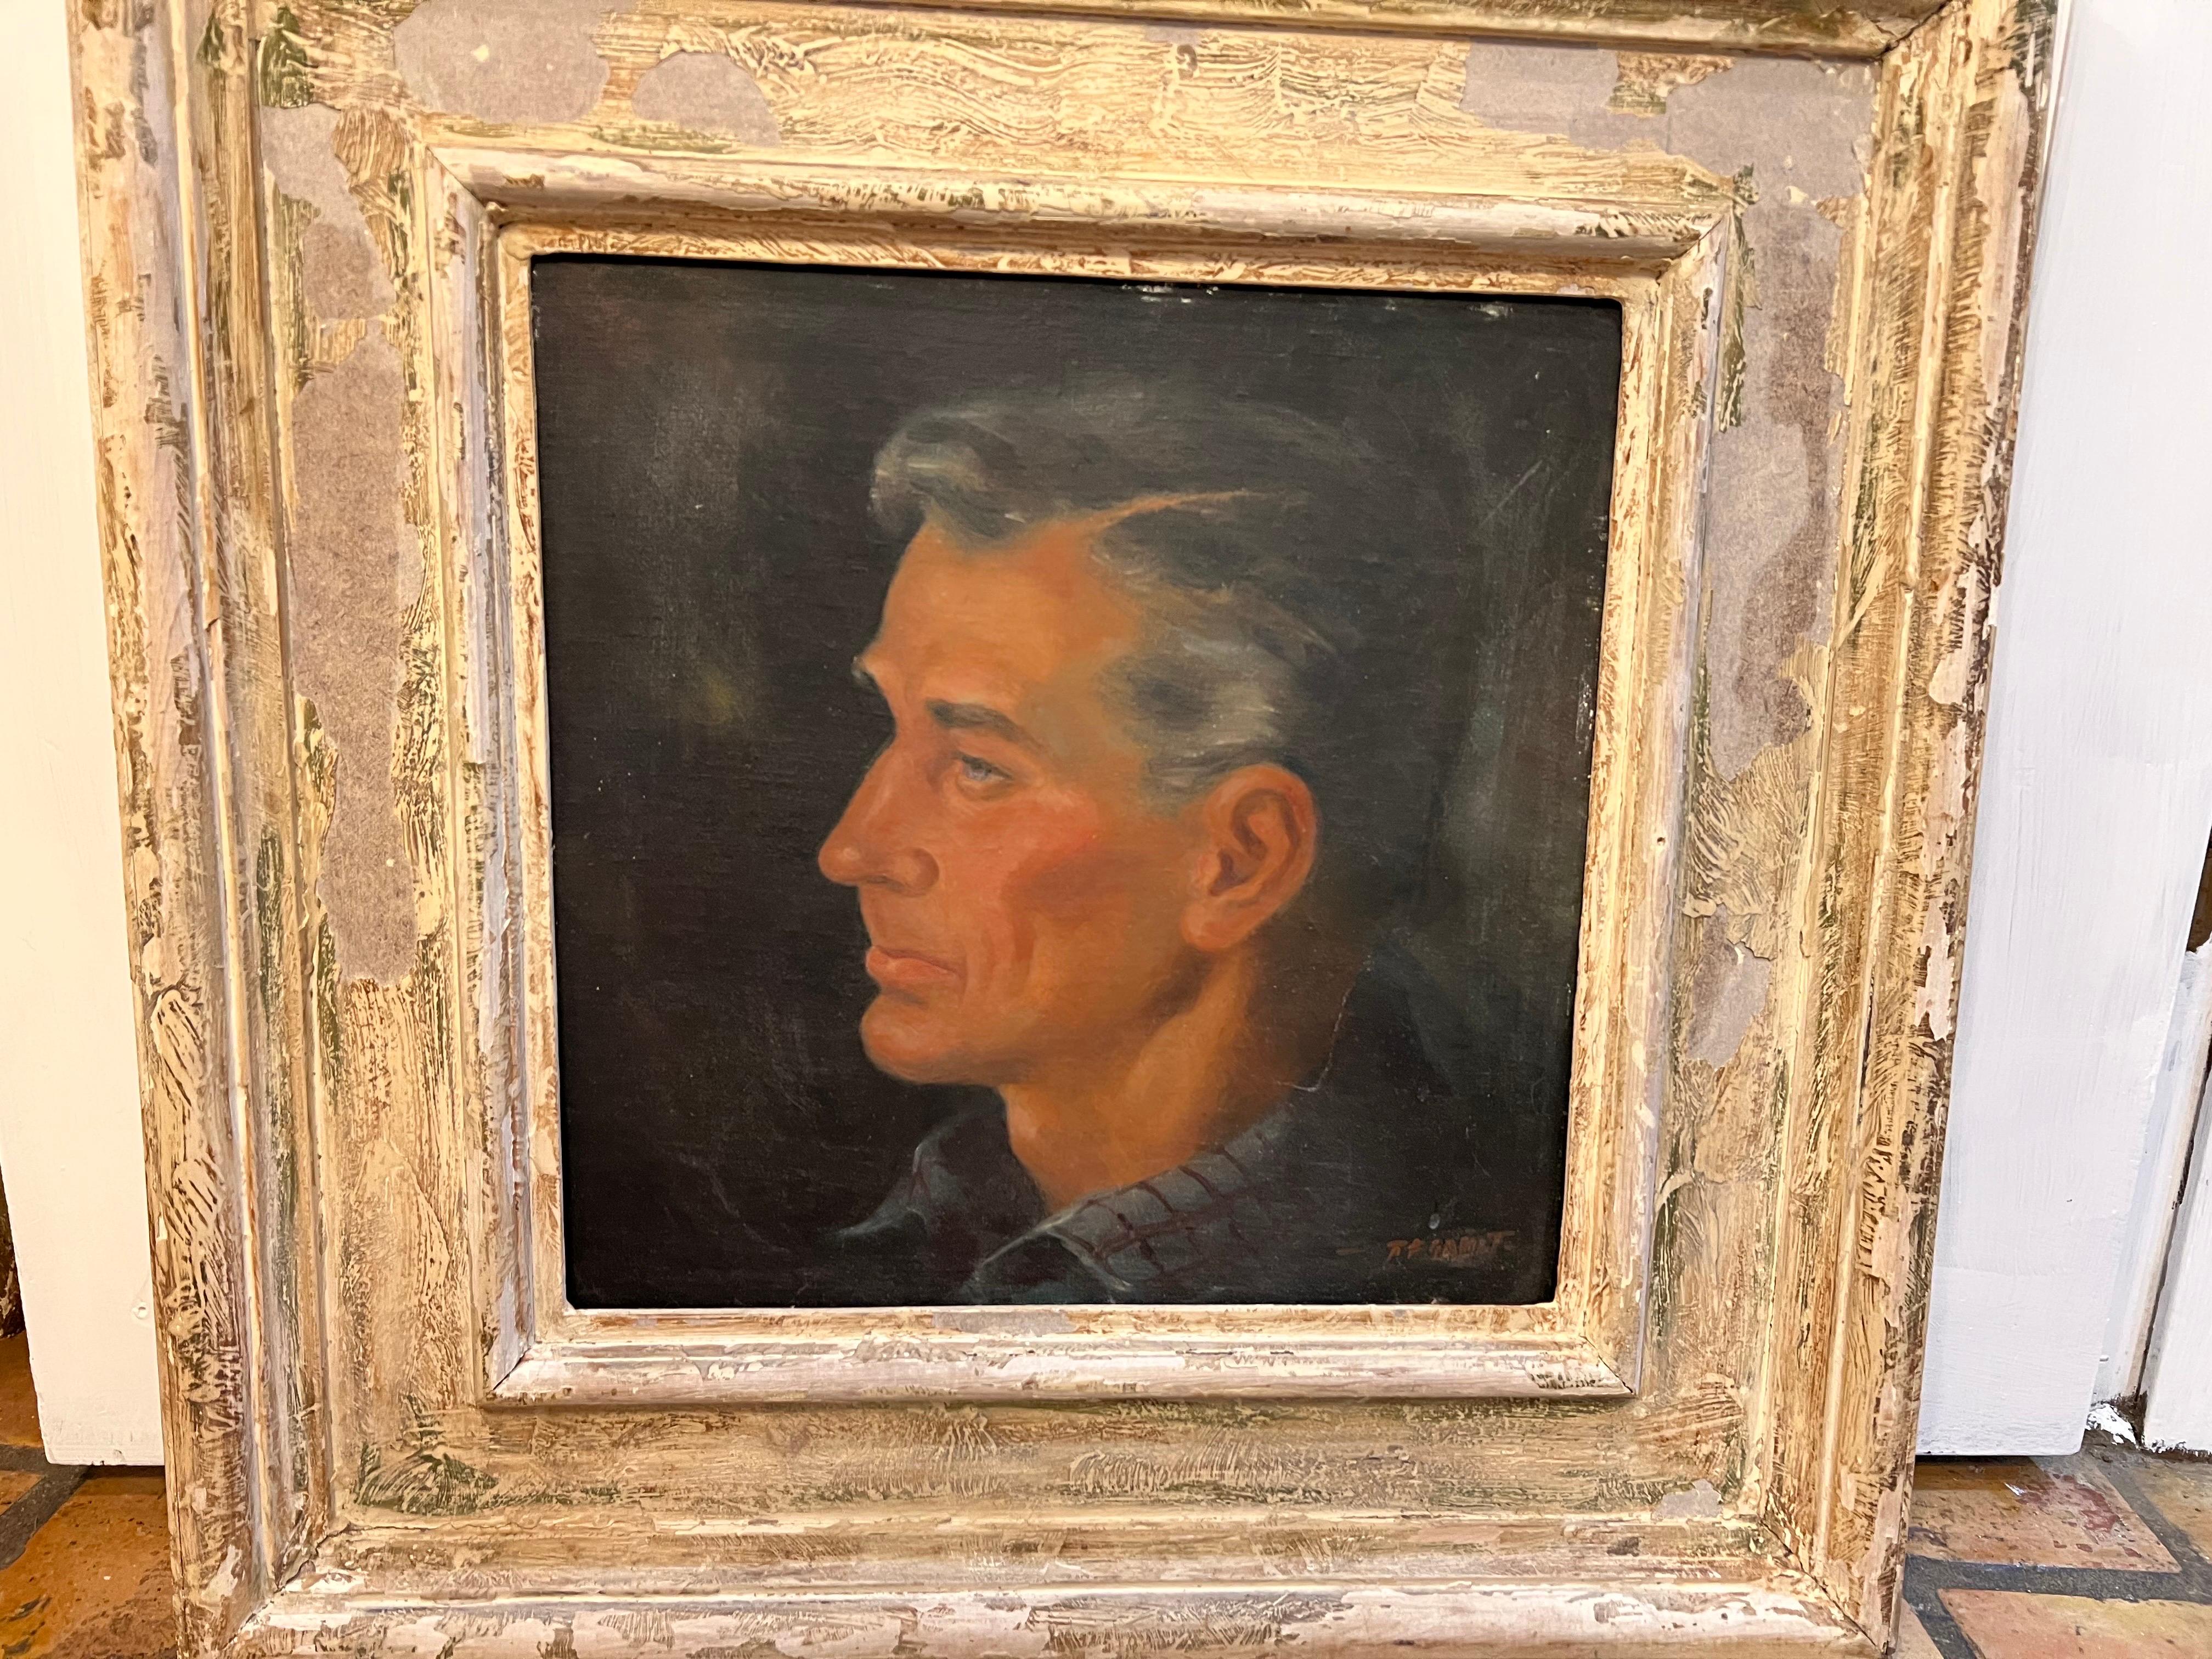 Robert Franklin Gault ( 1989-1977) Signed Portrait of a Male . Oil on board
Nice compostition of a male singend lower right. In a shabby chic white washed frame . This item can parcel ship for $49.
Robert F. Gault was an American Impressionist